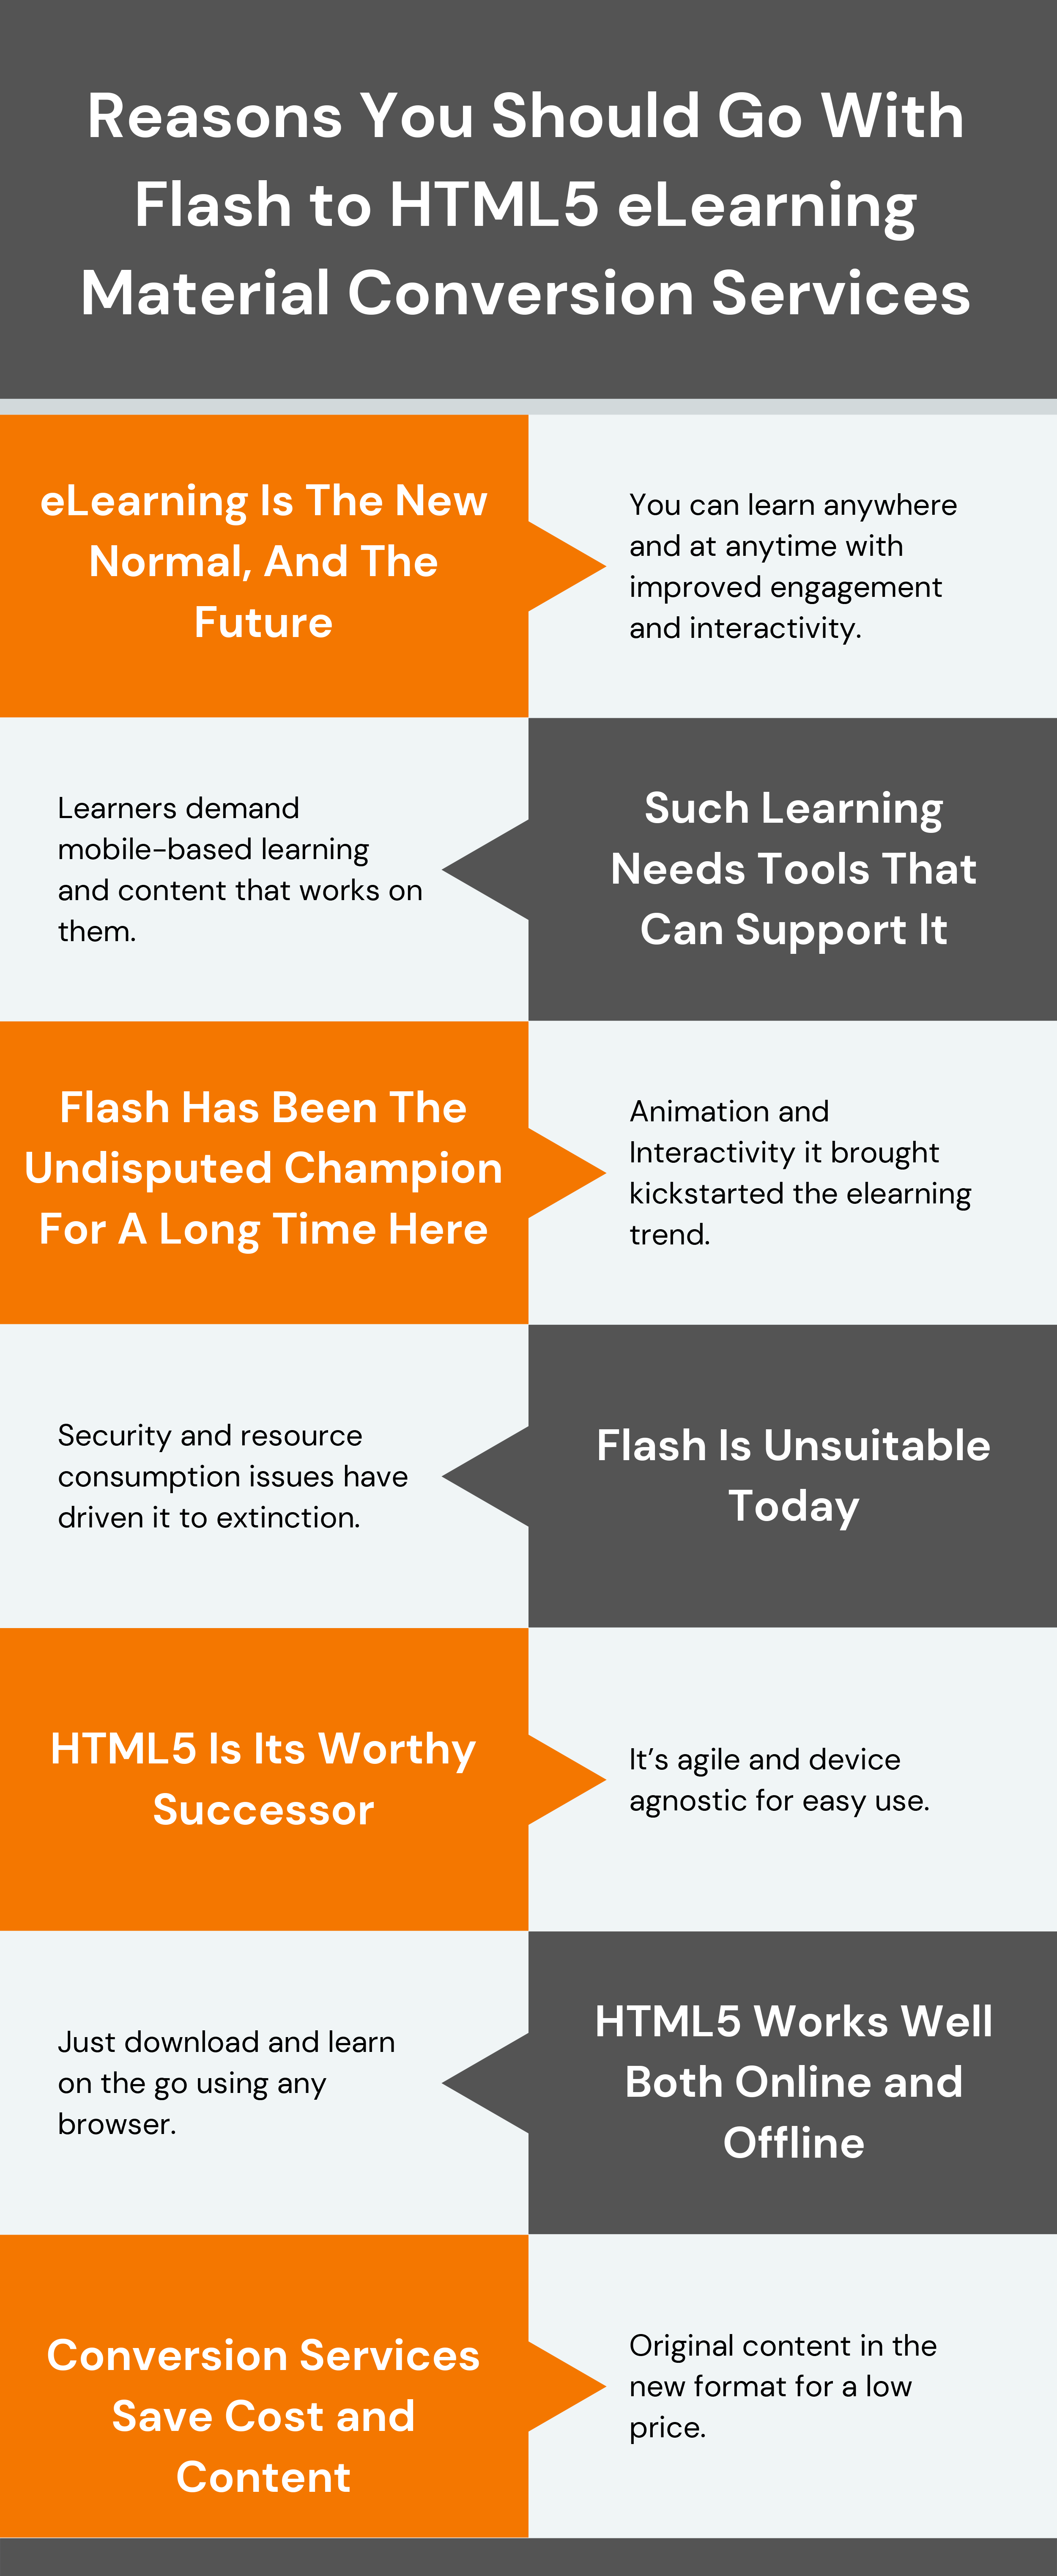 Flash to HTML5 eLearning Conversion Services